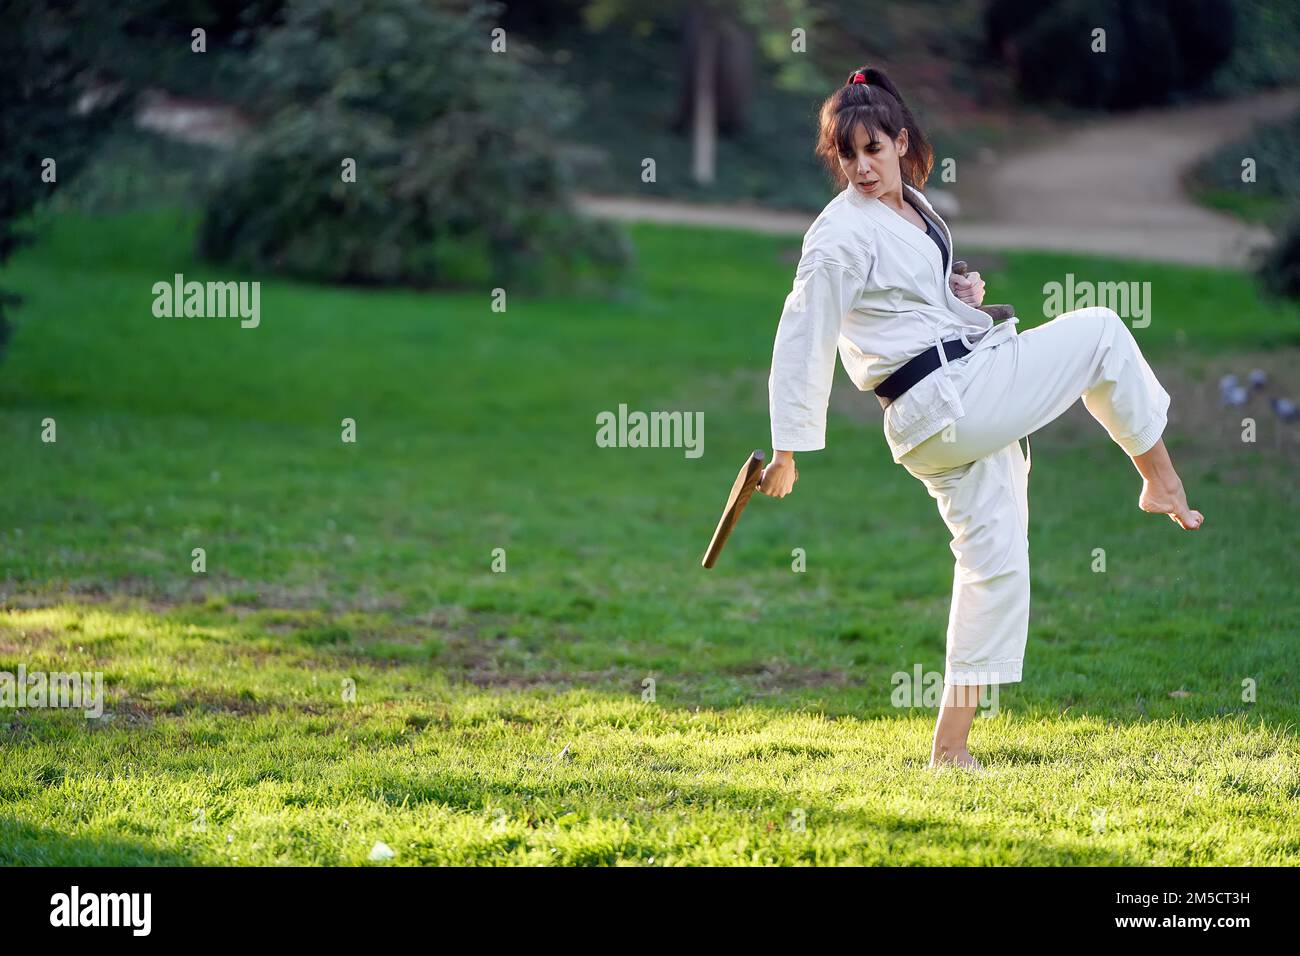 Karate woman in kimono and black belt training outdoors. Sports and martial arts concept. Stock Photo